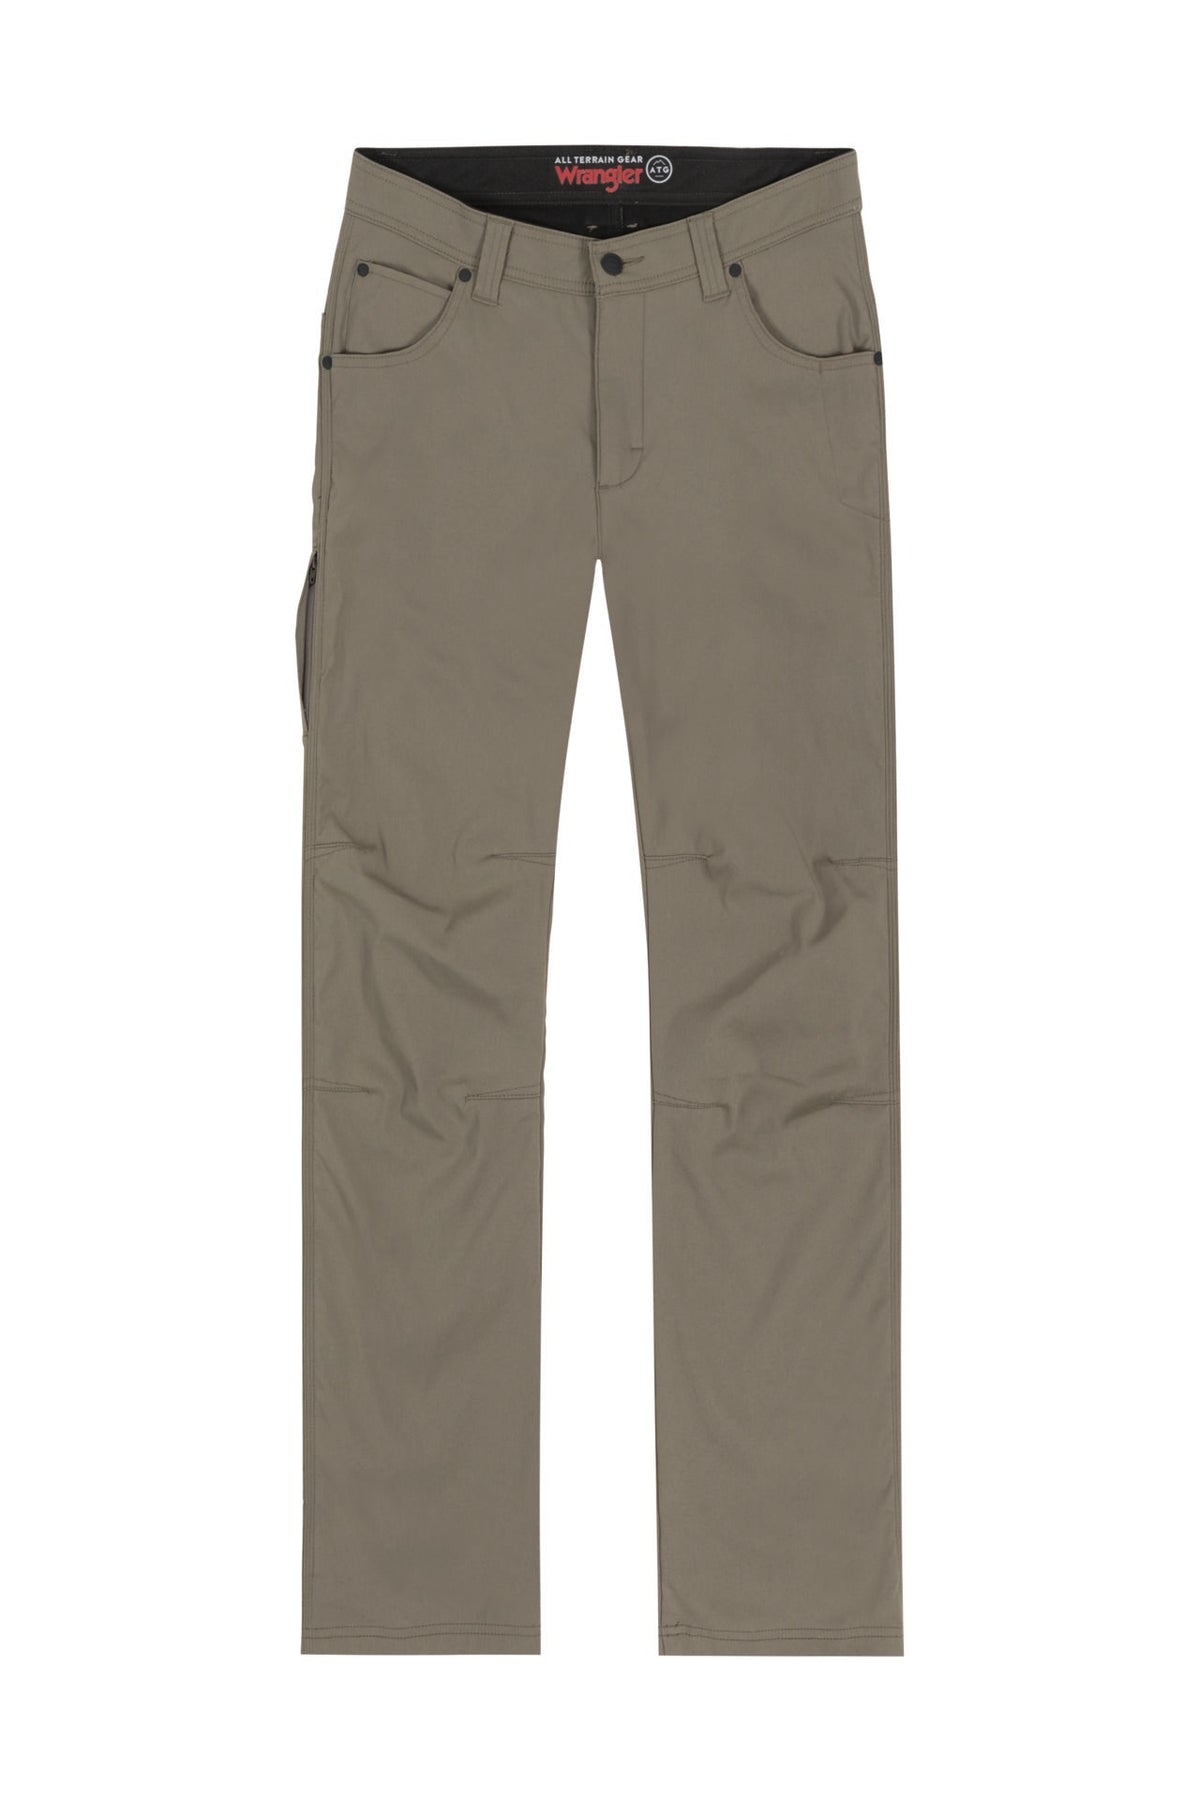 Fleece Lined Utility Pant in Bungee Cord